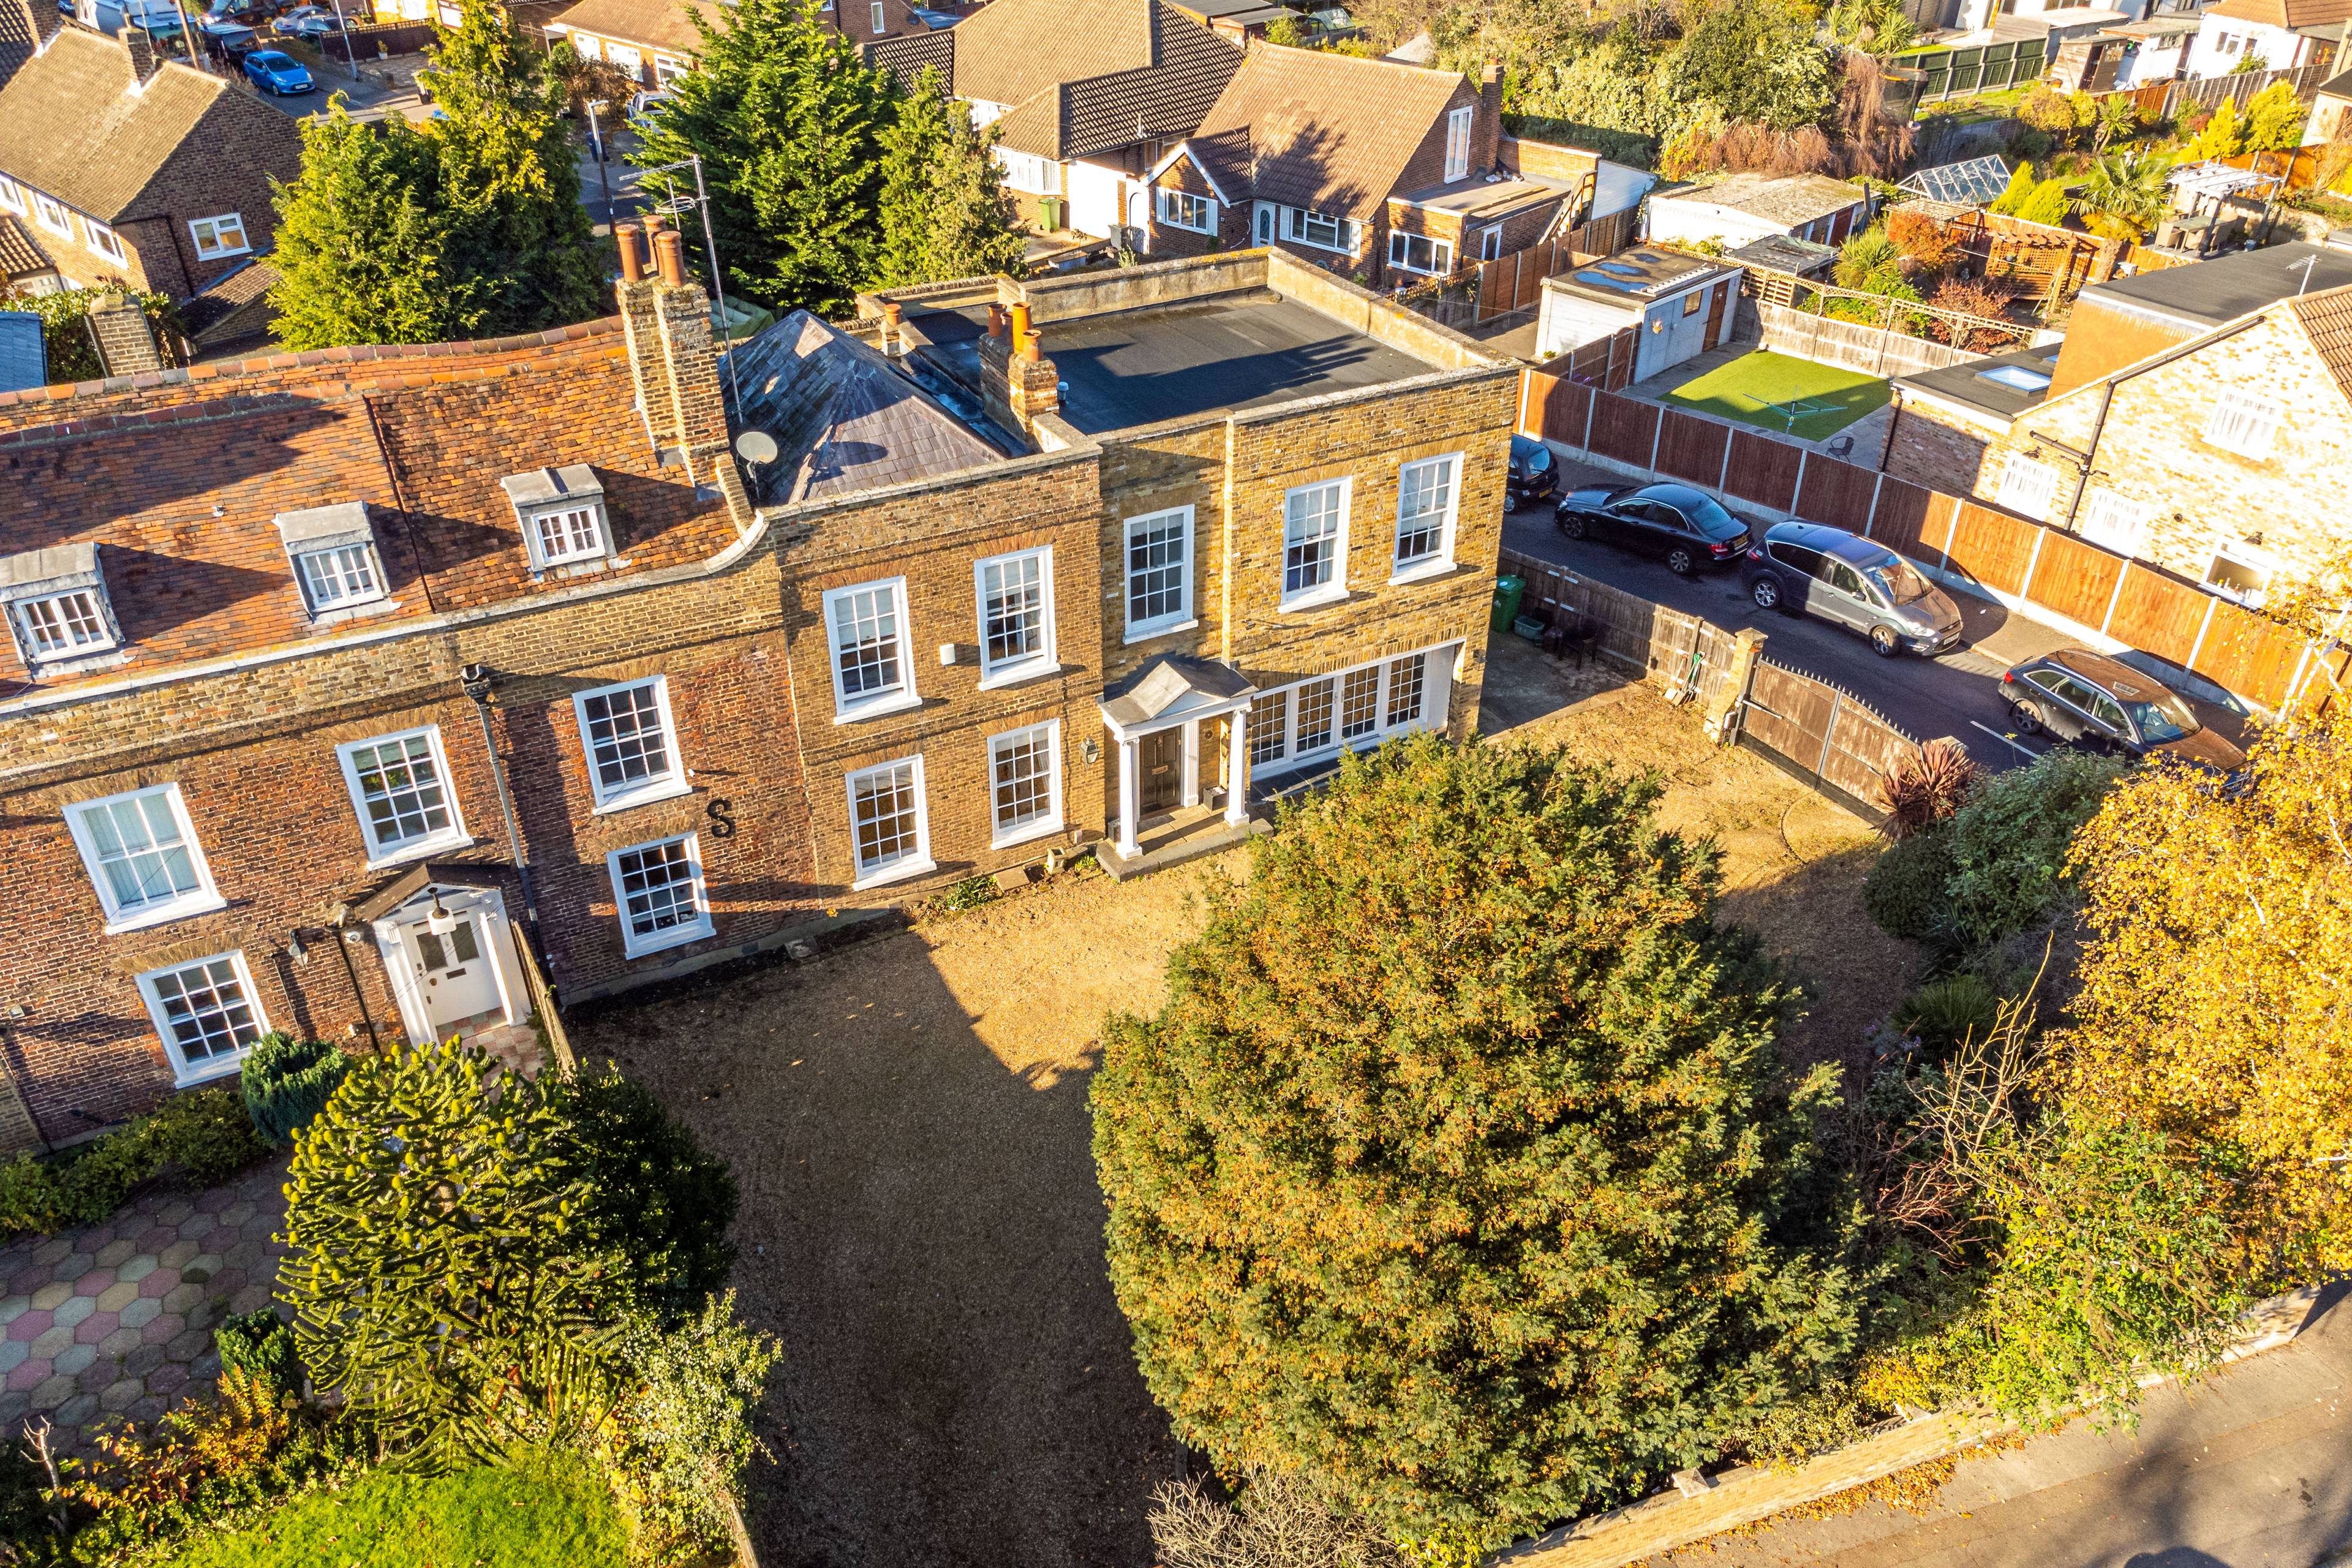 Nest Seekers International are proud to offer to the market this architecturally stunning, Grade 11 Listed Wing of a Georgian Manor House of just over 3,300sqft.